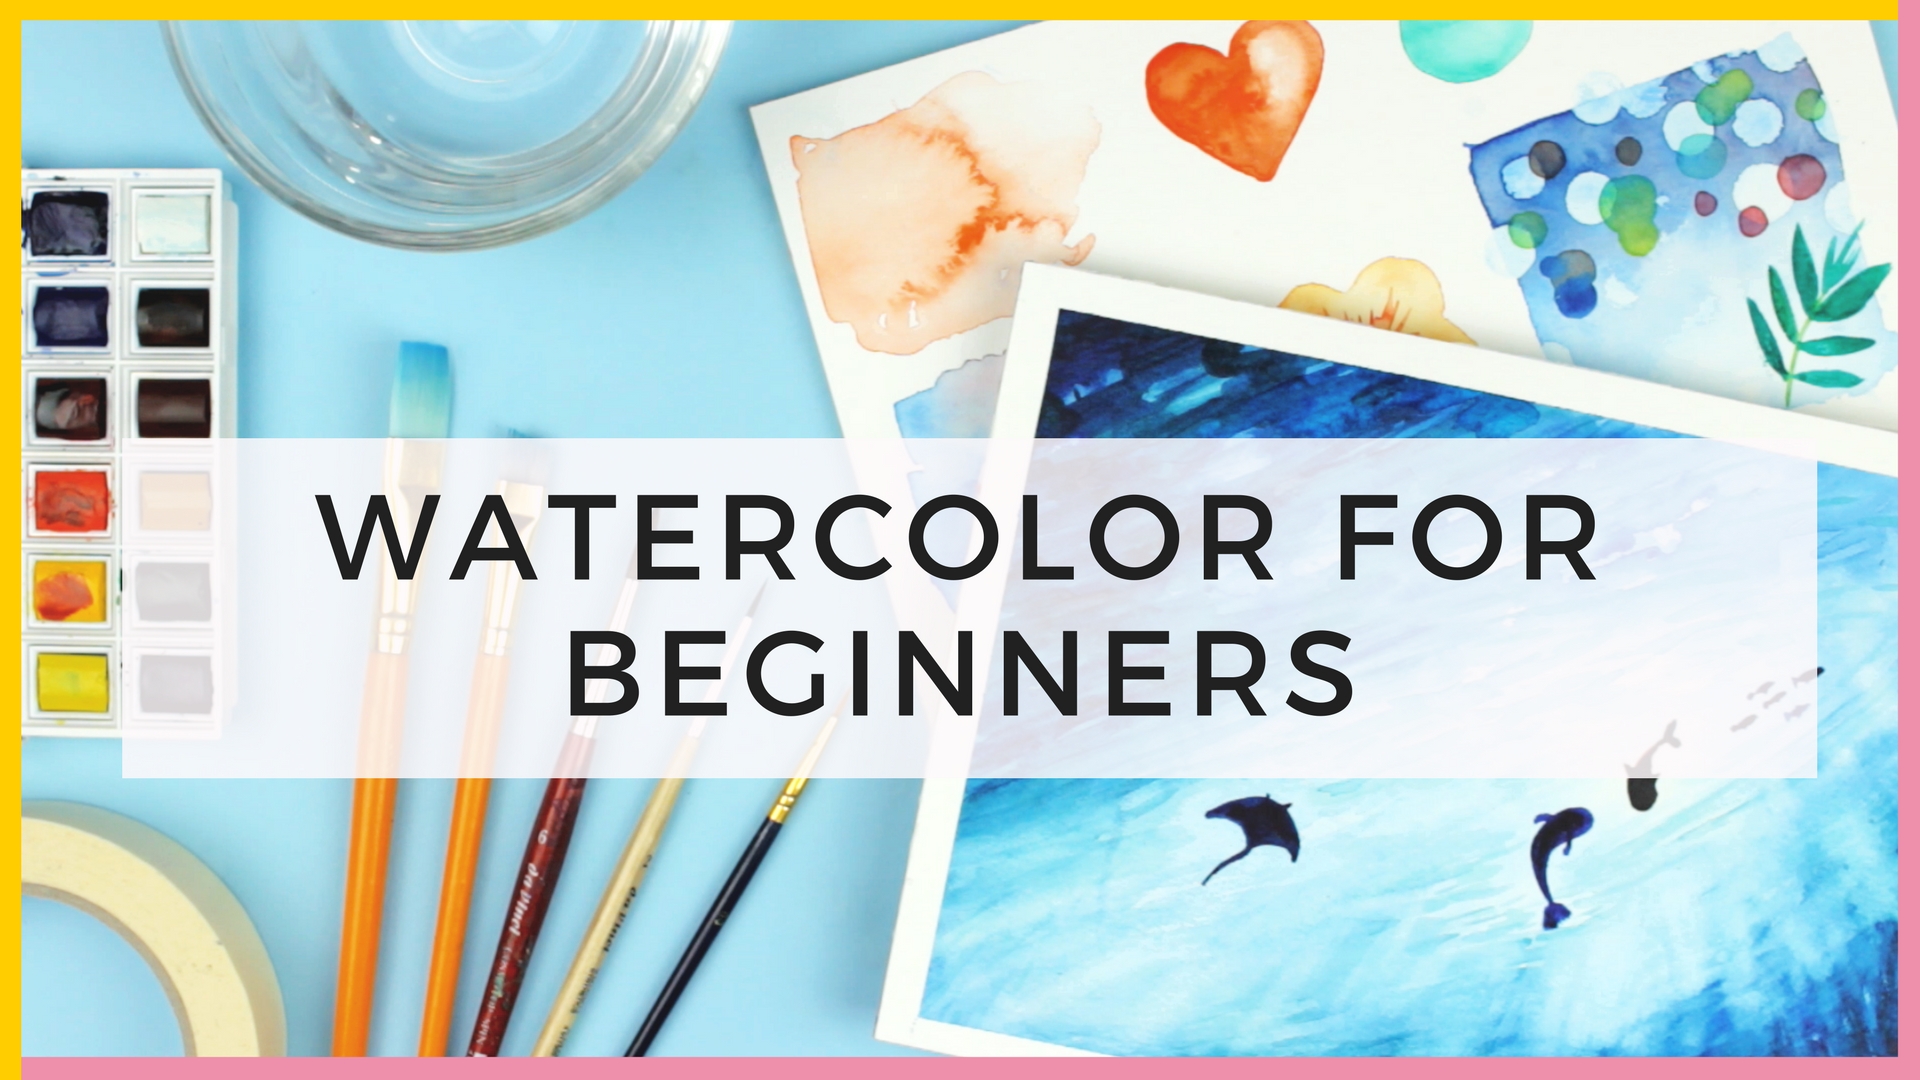 Watercolor-For-Beginners- Supplies- Watercolor-Techniques-for-Beginners-makoccino